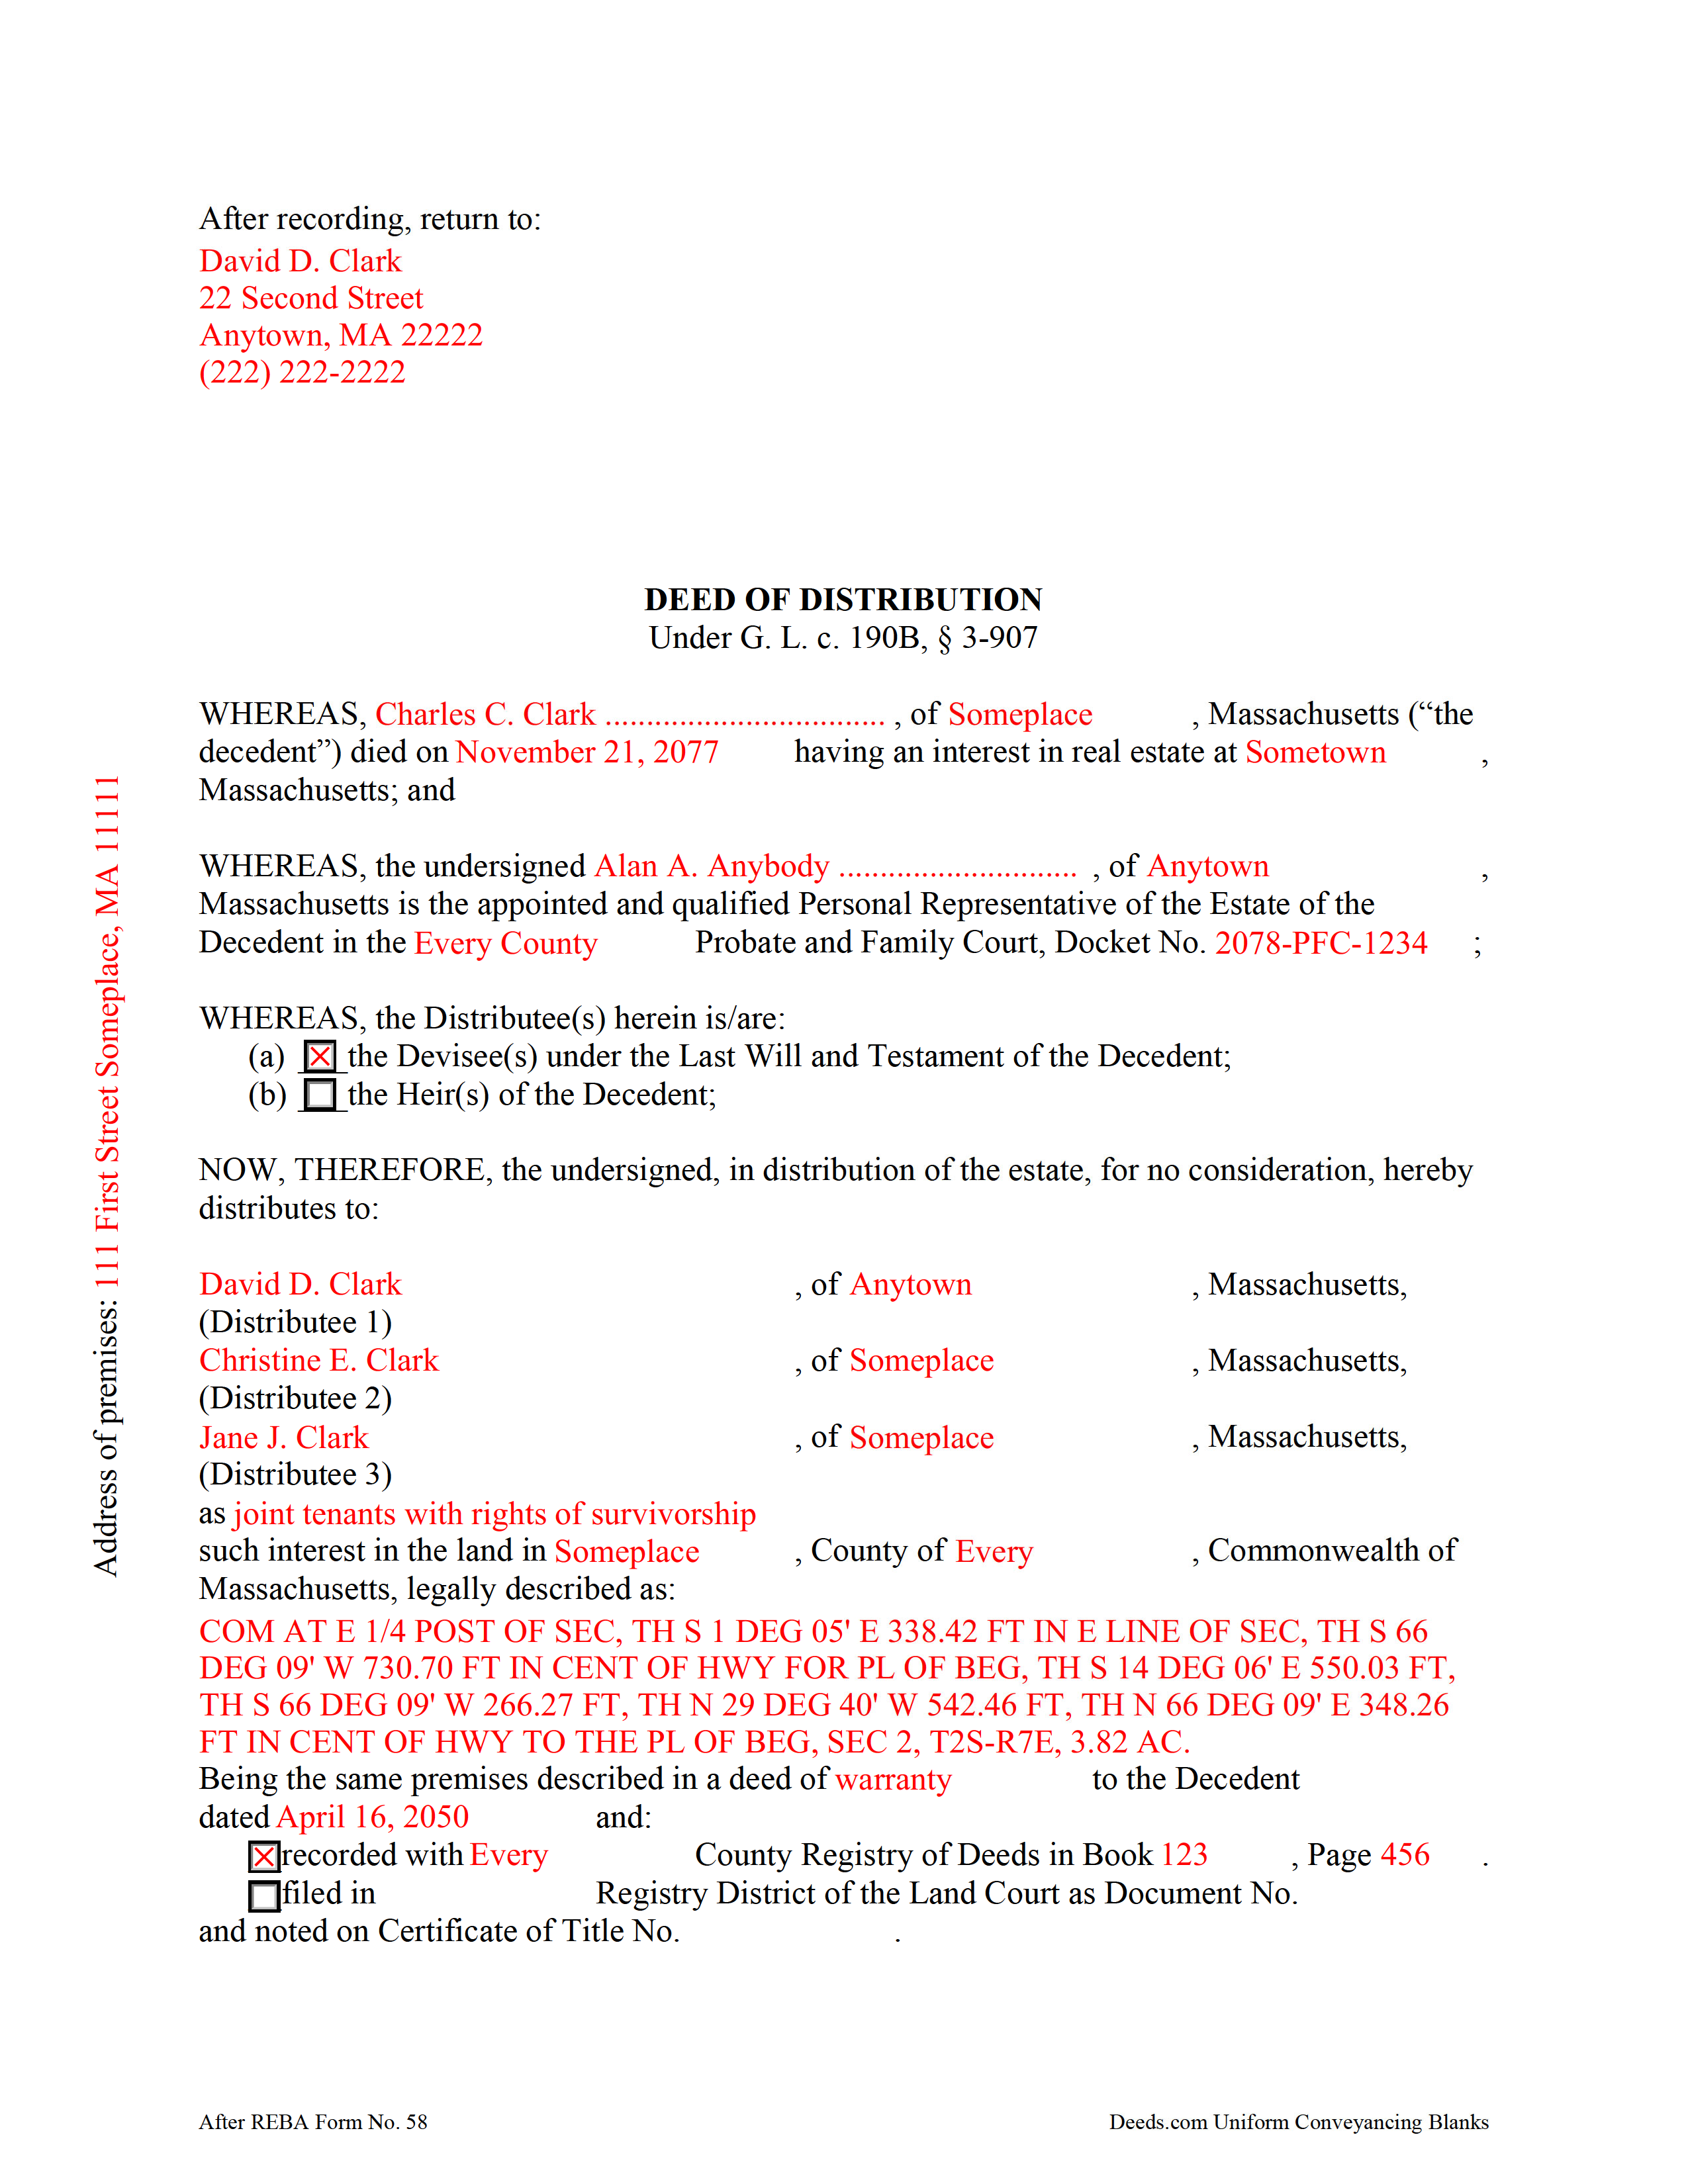 Completed Example of the Personal Representative Deed of Distribution Document